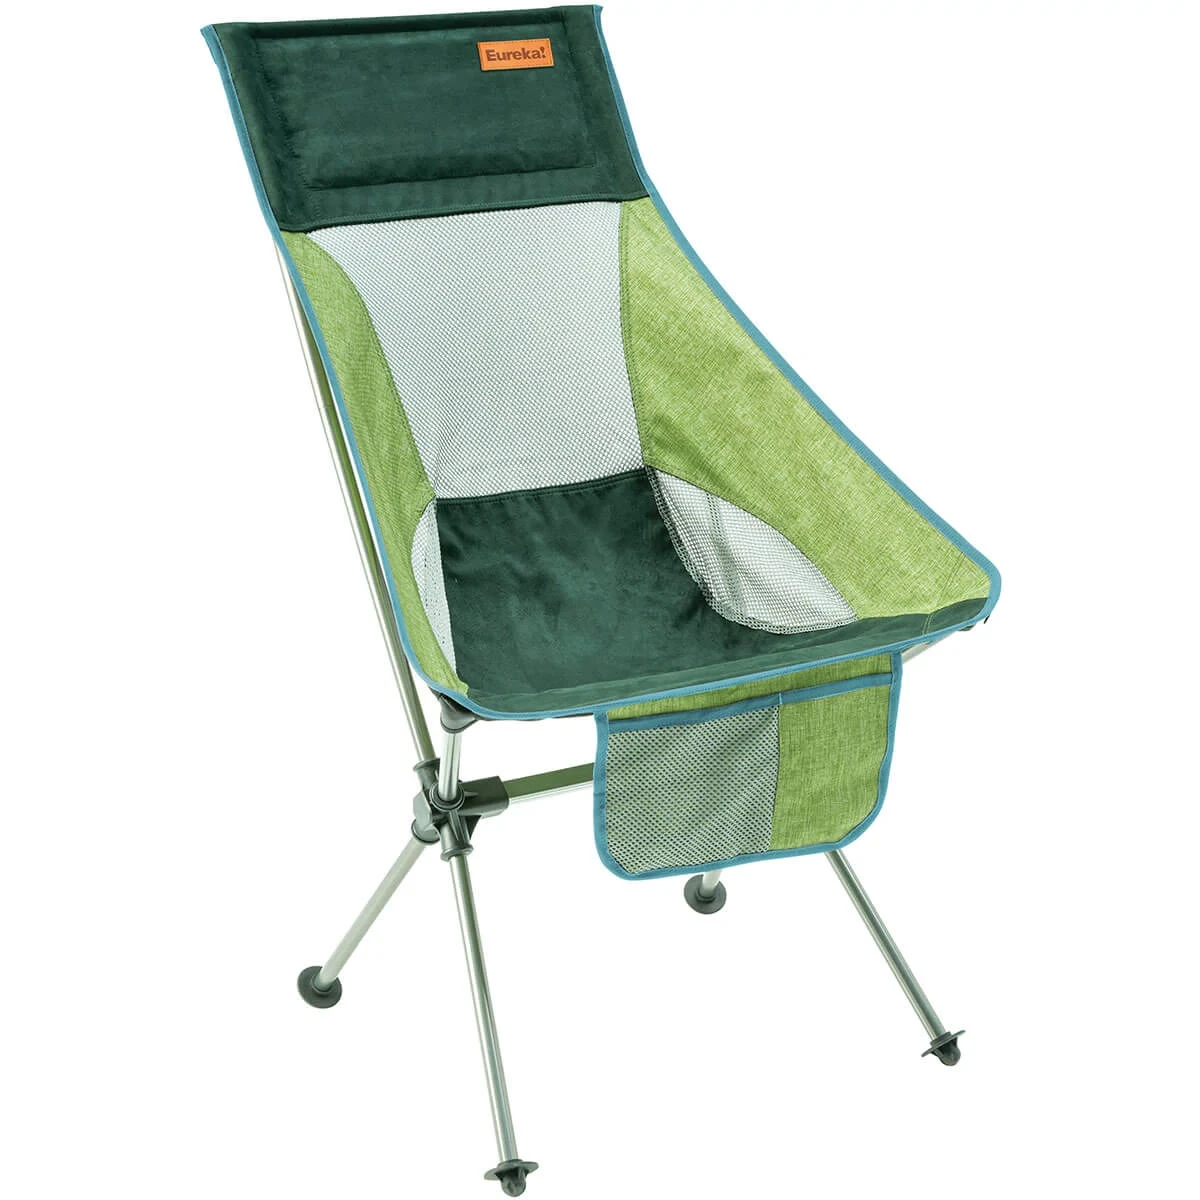 Eureka! Tagalong Comfort Camp Chair with pocket out